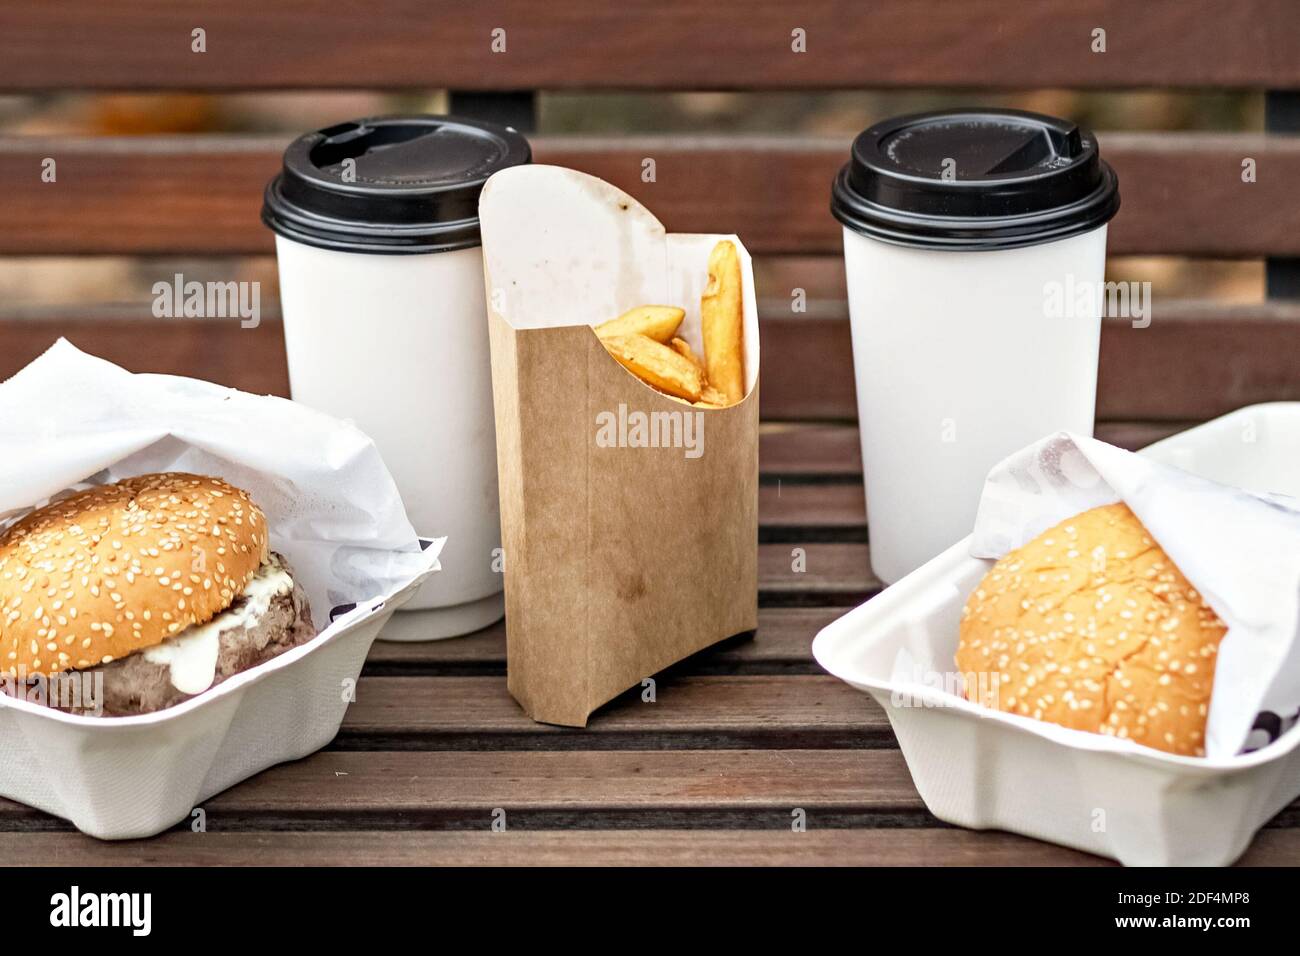 https://c8.alamy.com/comp/2DF4MP8/fast-food-paper-cups-with-coffee-hamburger-boxes-and-fries-on-a-park-benchtakeaway-food-concept-2DF4MP8.jpg